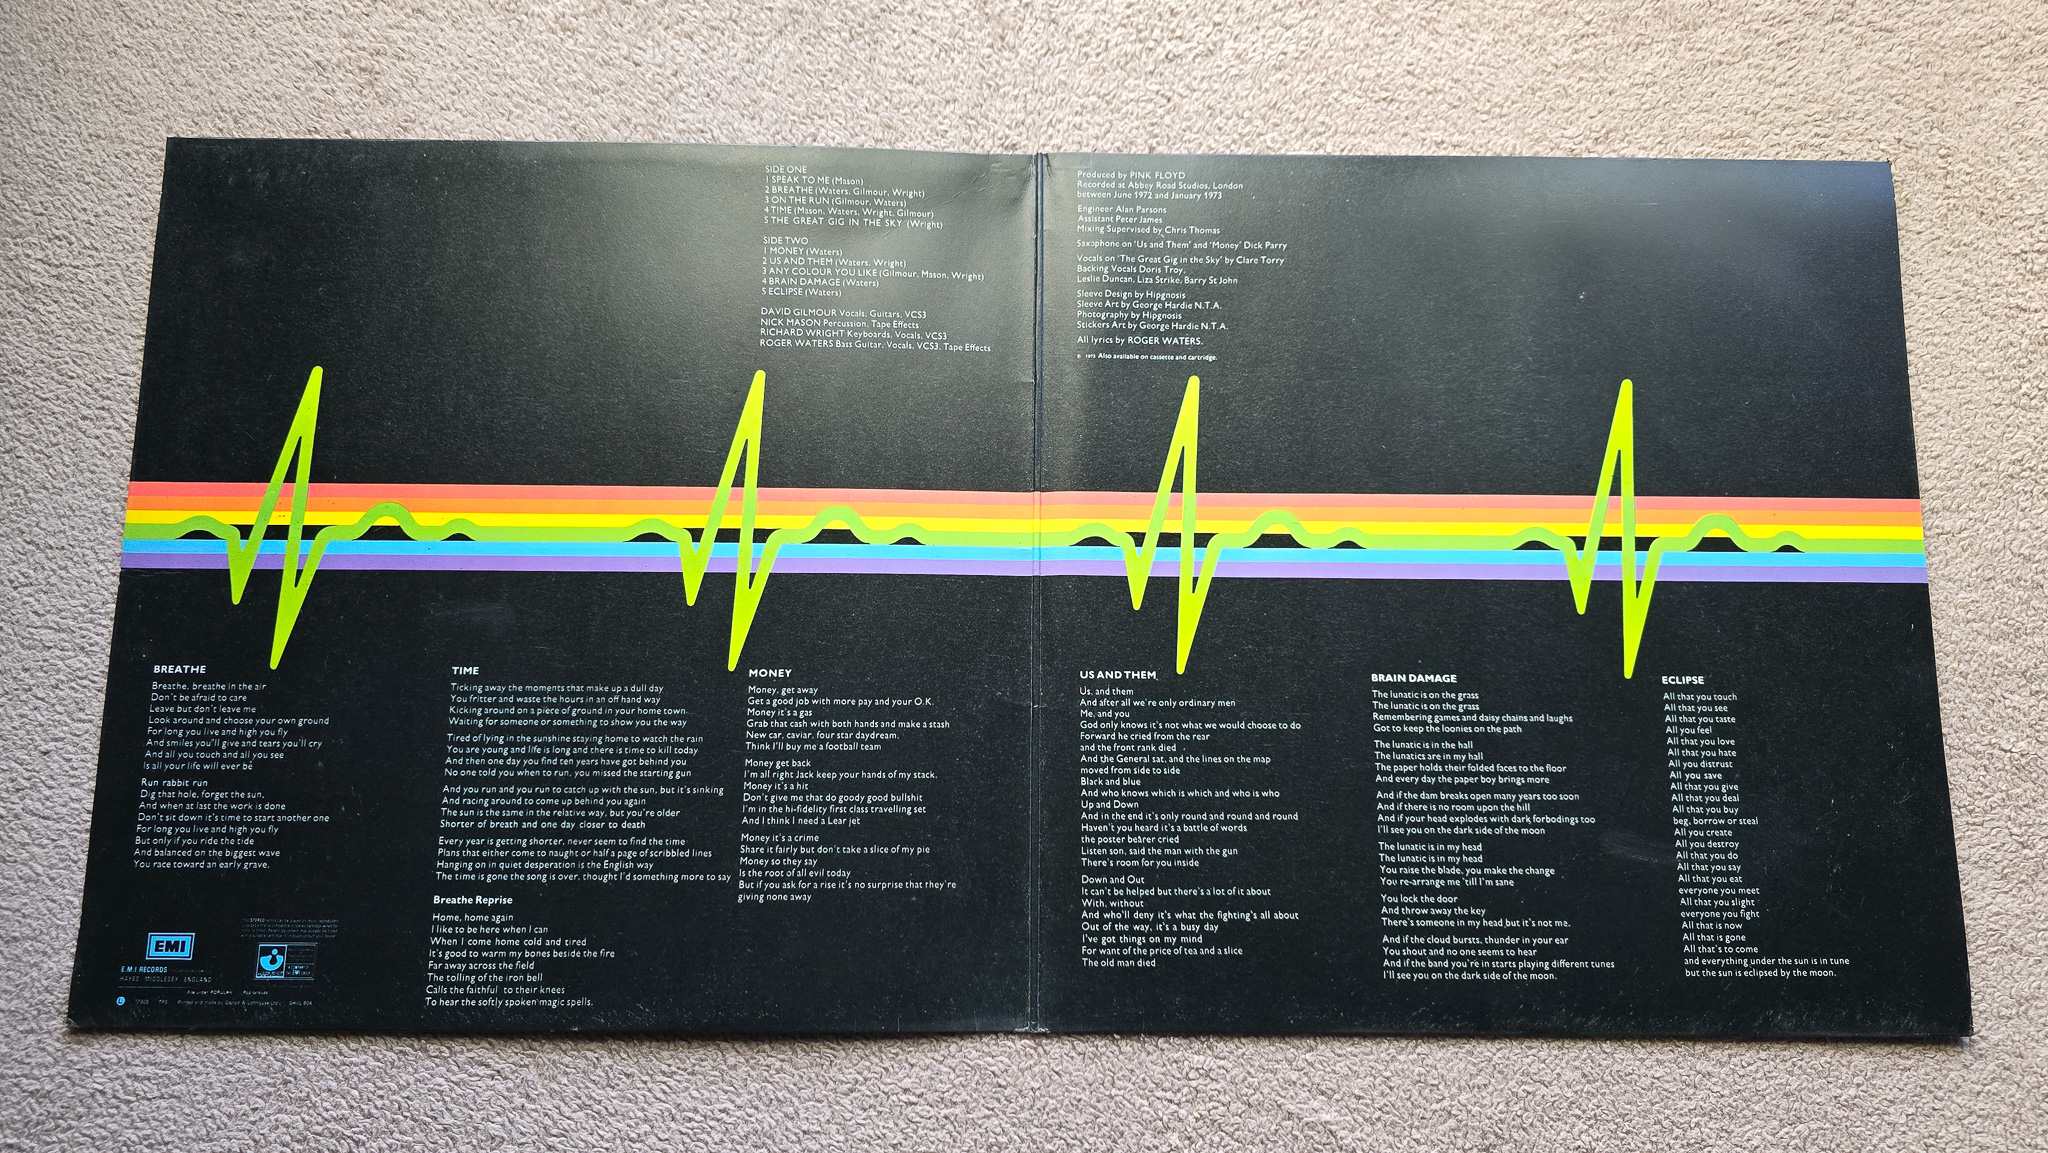 Pink Floyd – The Dark Side Of The Moon early UK Vinyl LP + 2 Posters & Sticker - Image 4 of 11